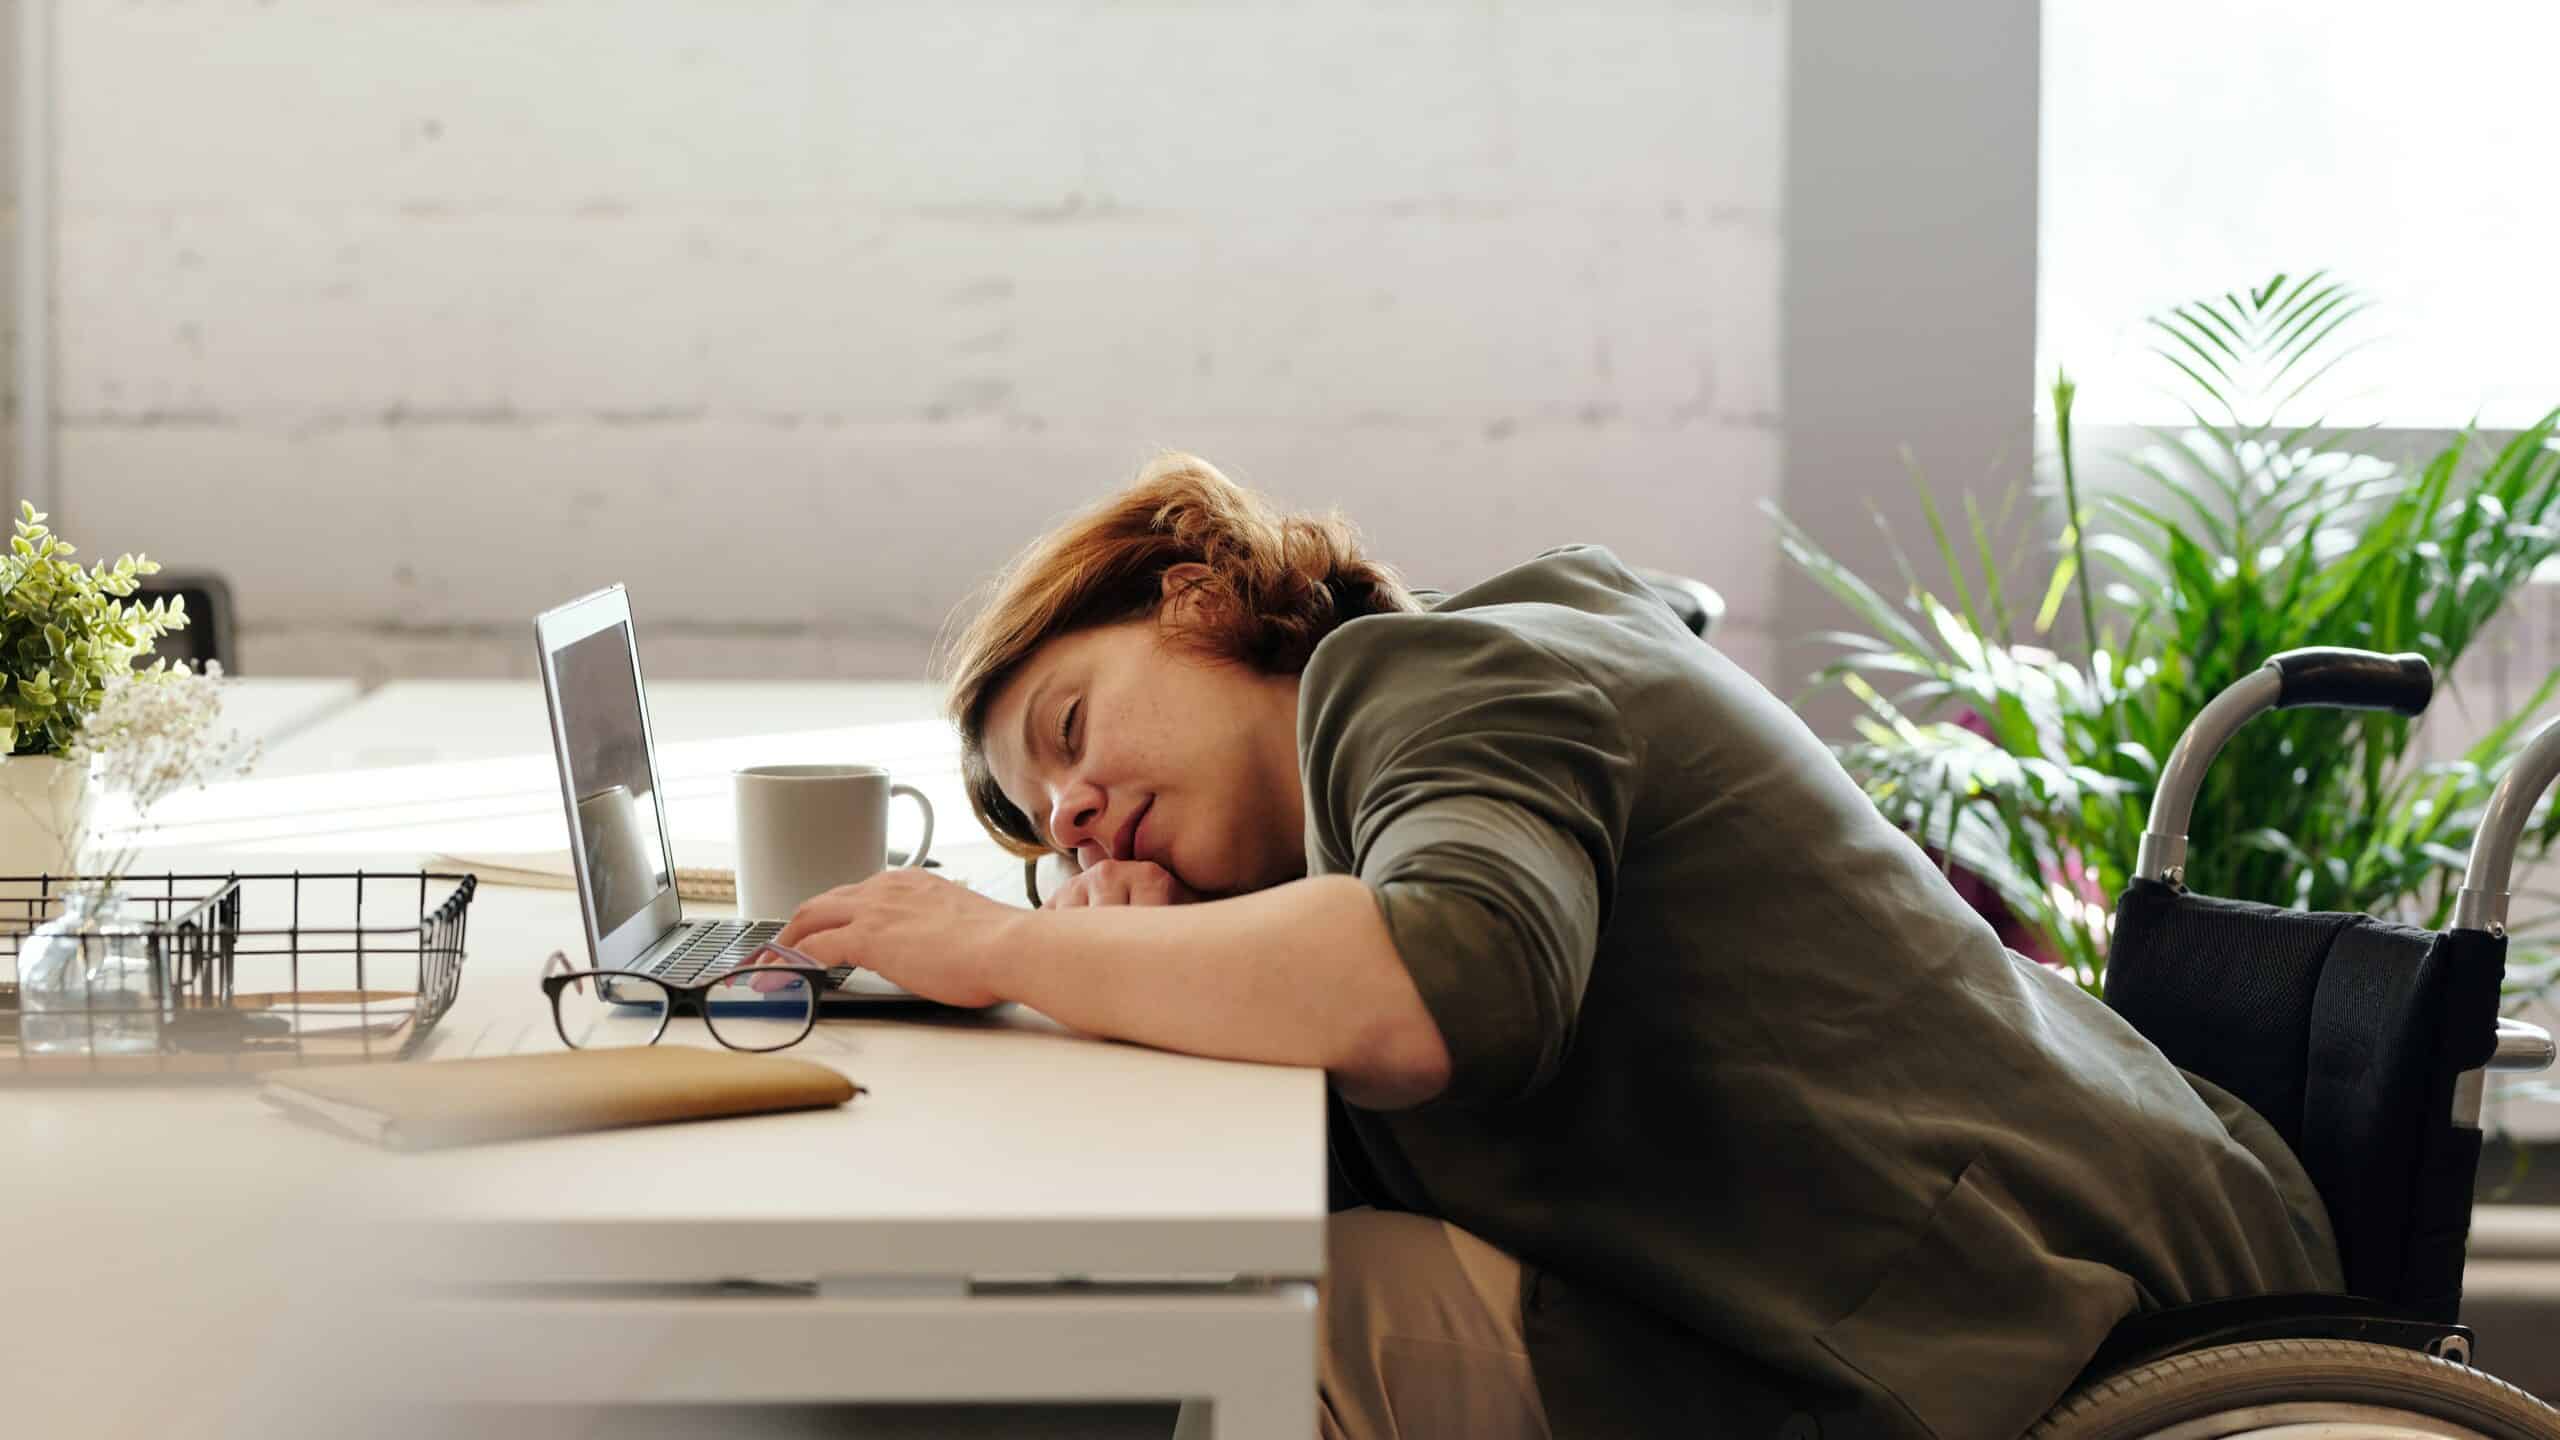 A woman sleeping at her desk. An image meant to depict procrastination.